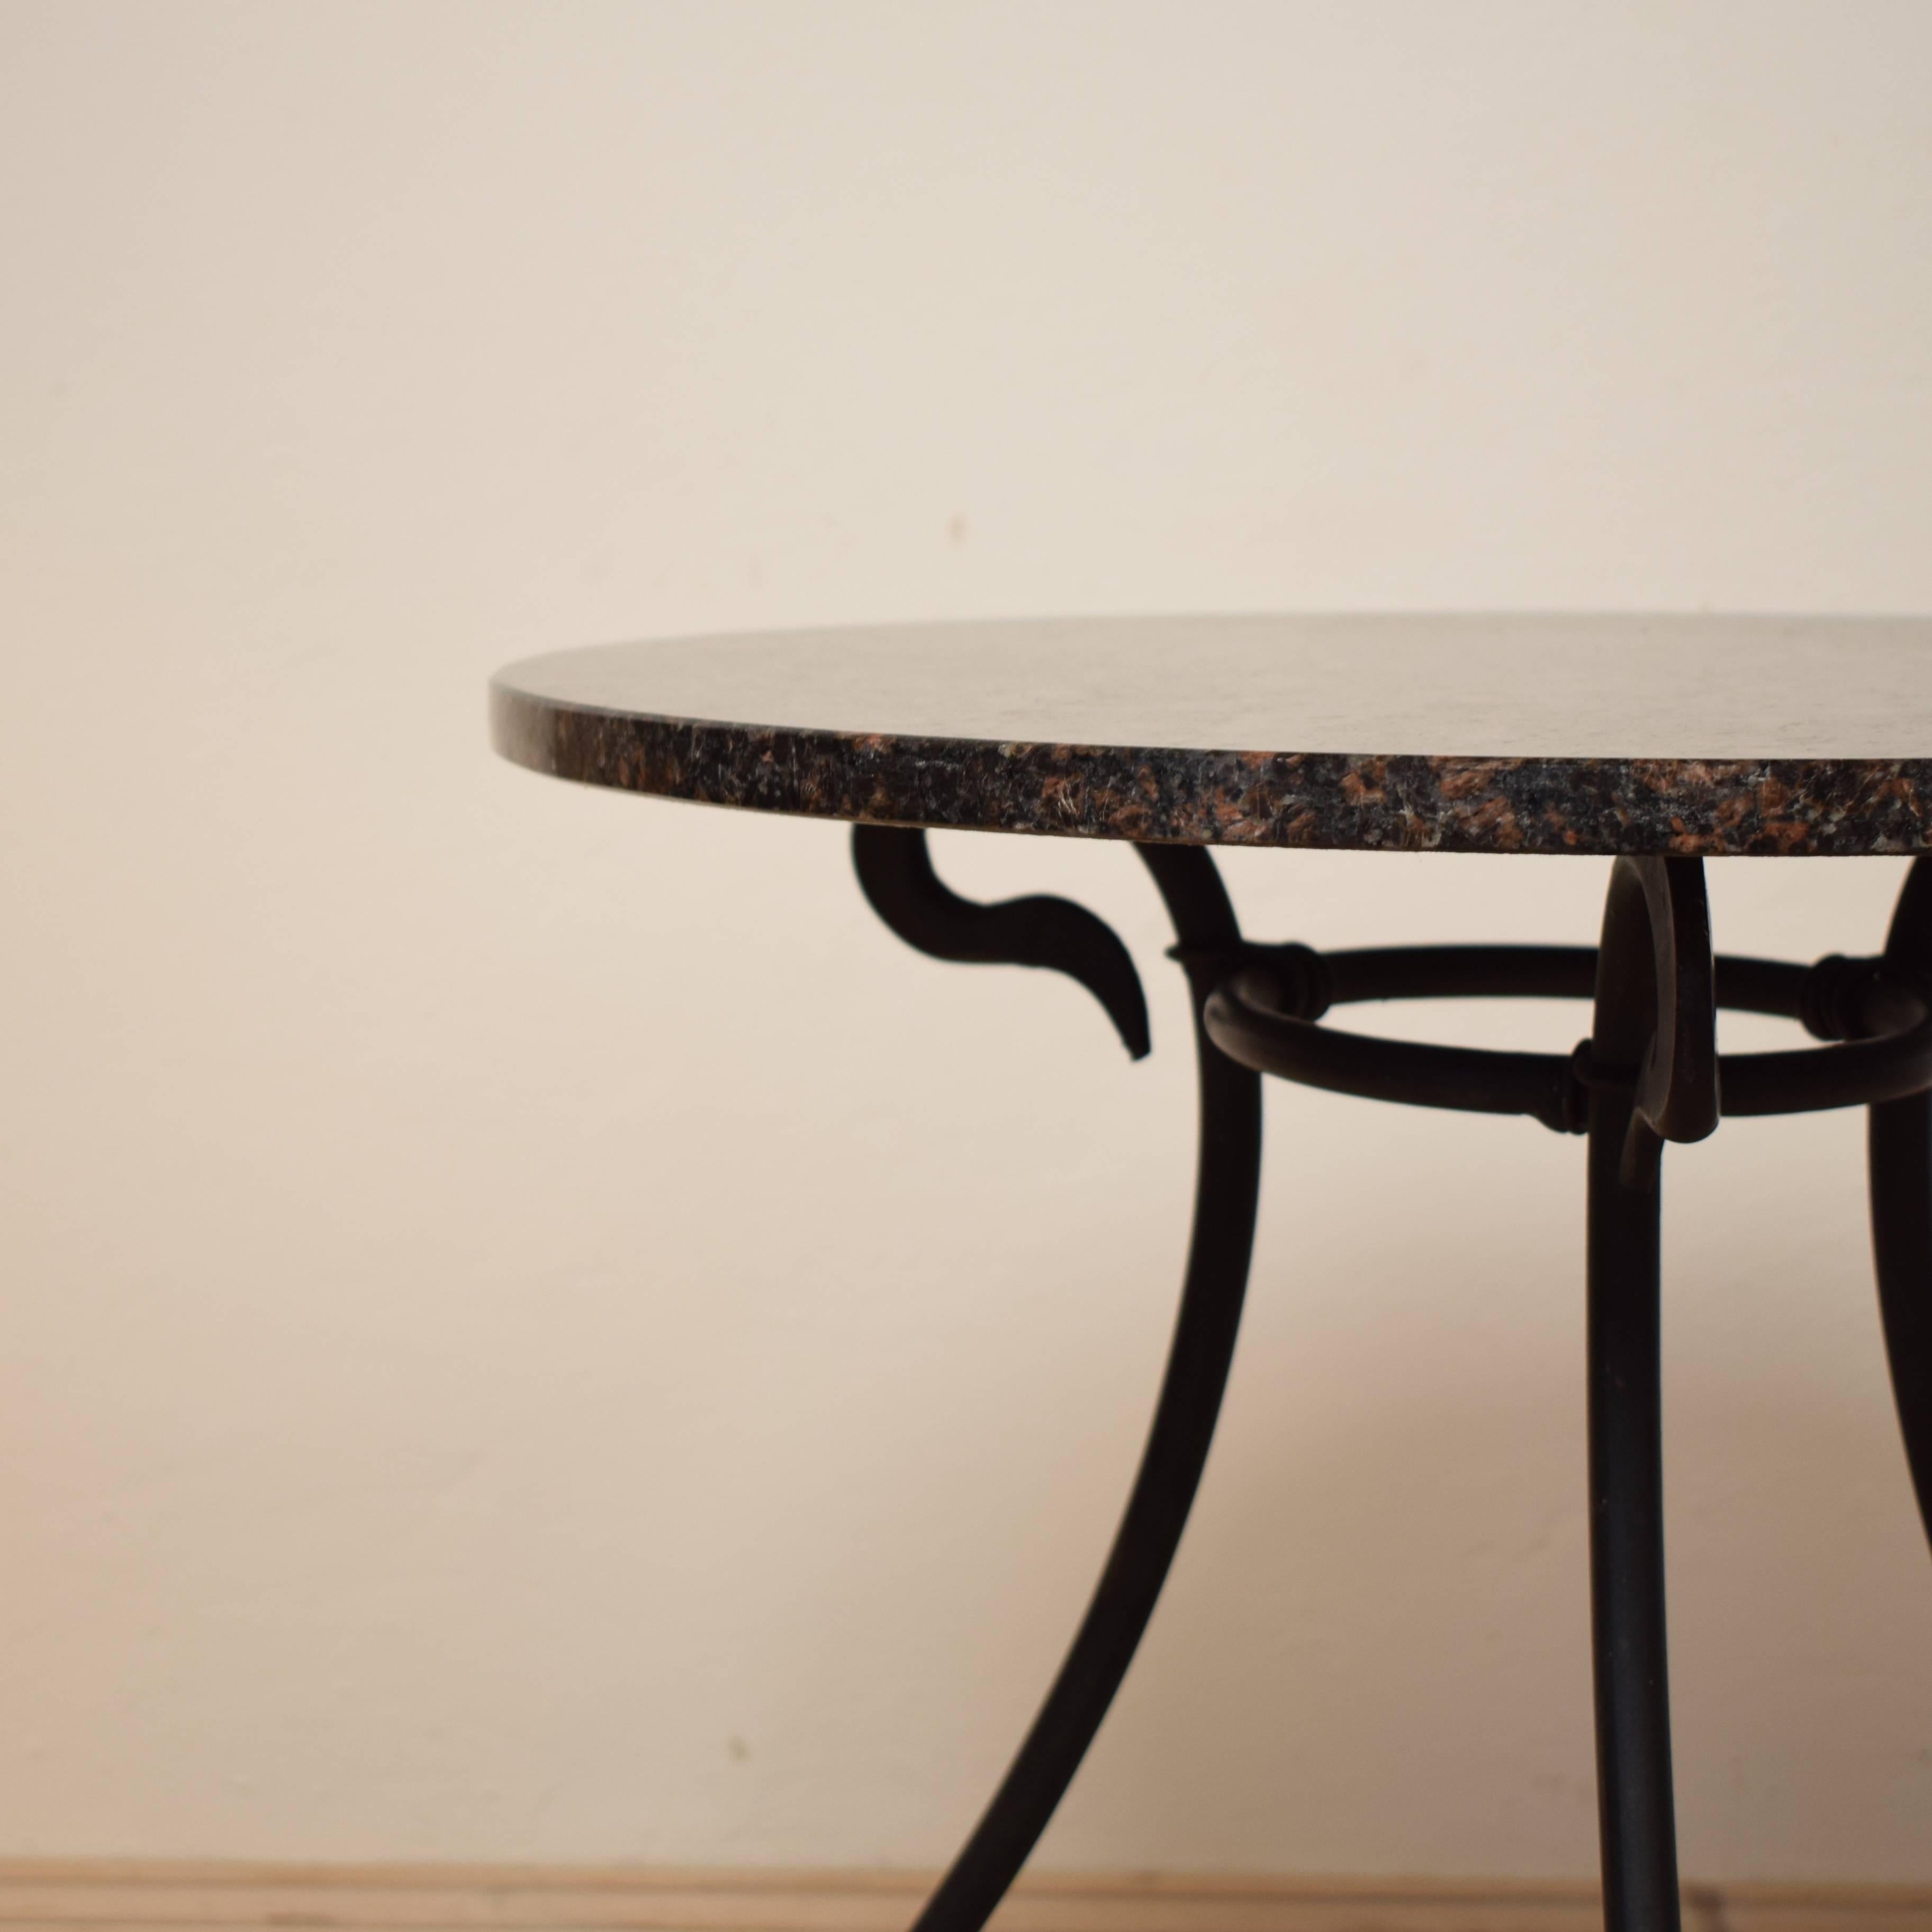 German 1950s Black Forged Iron Side Table with Granite Top